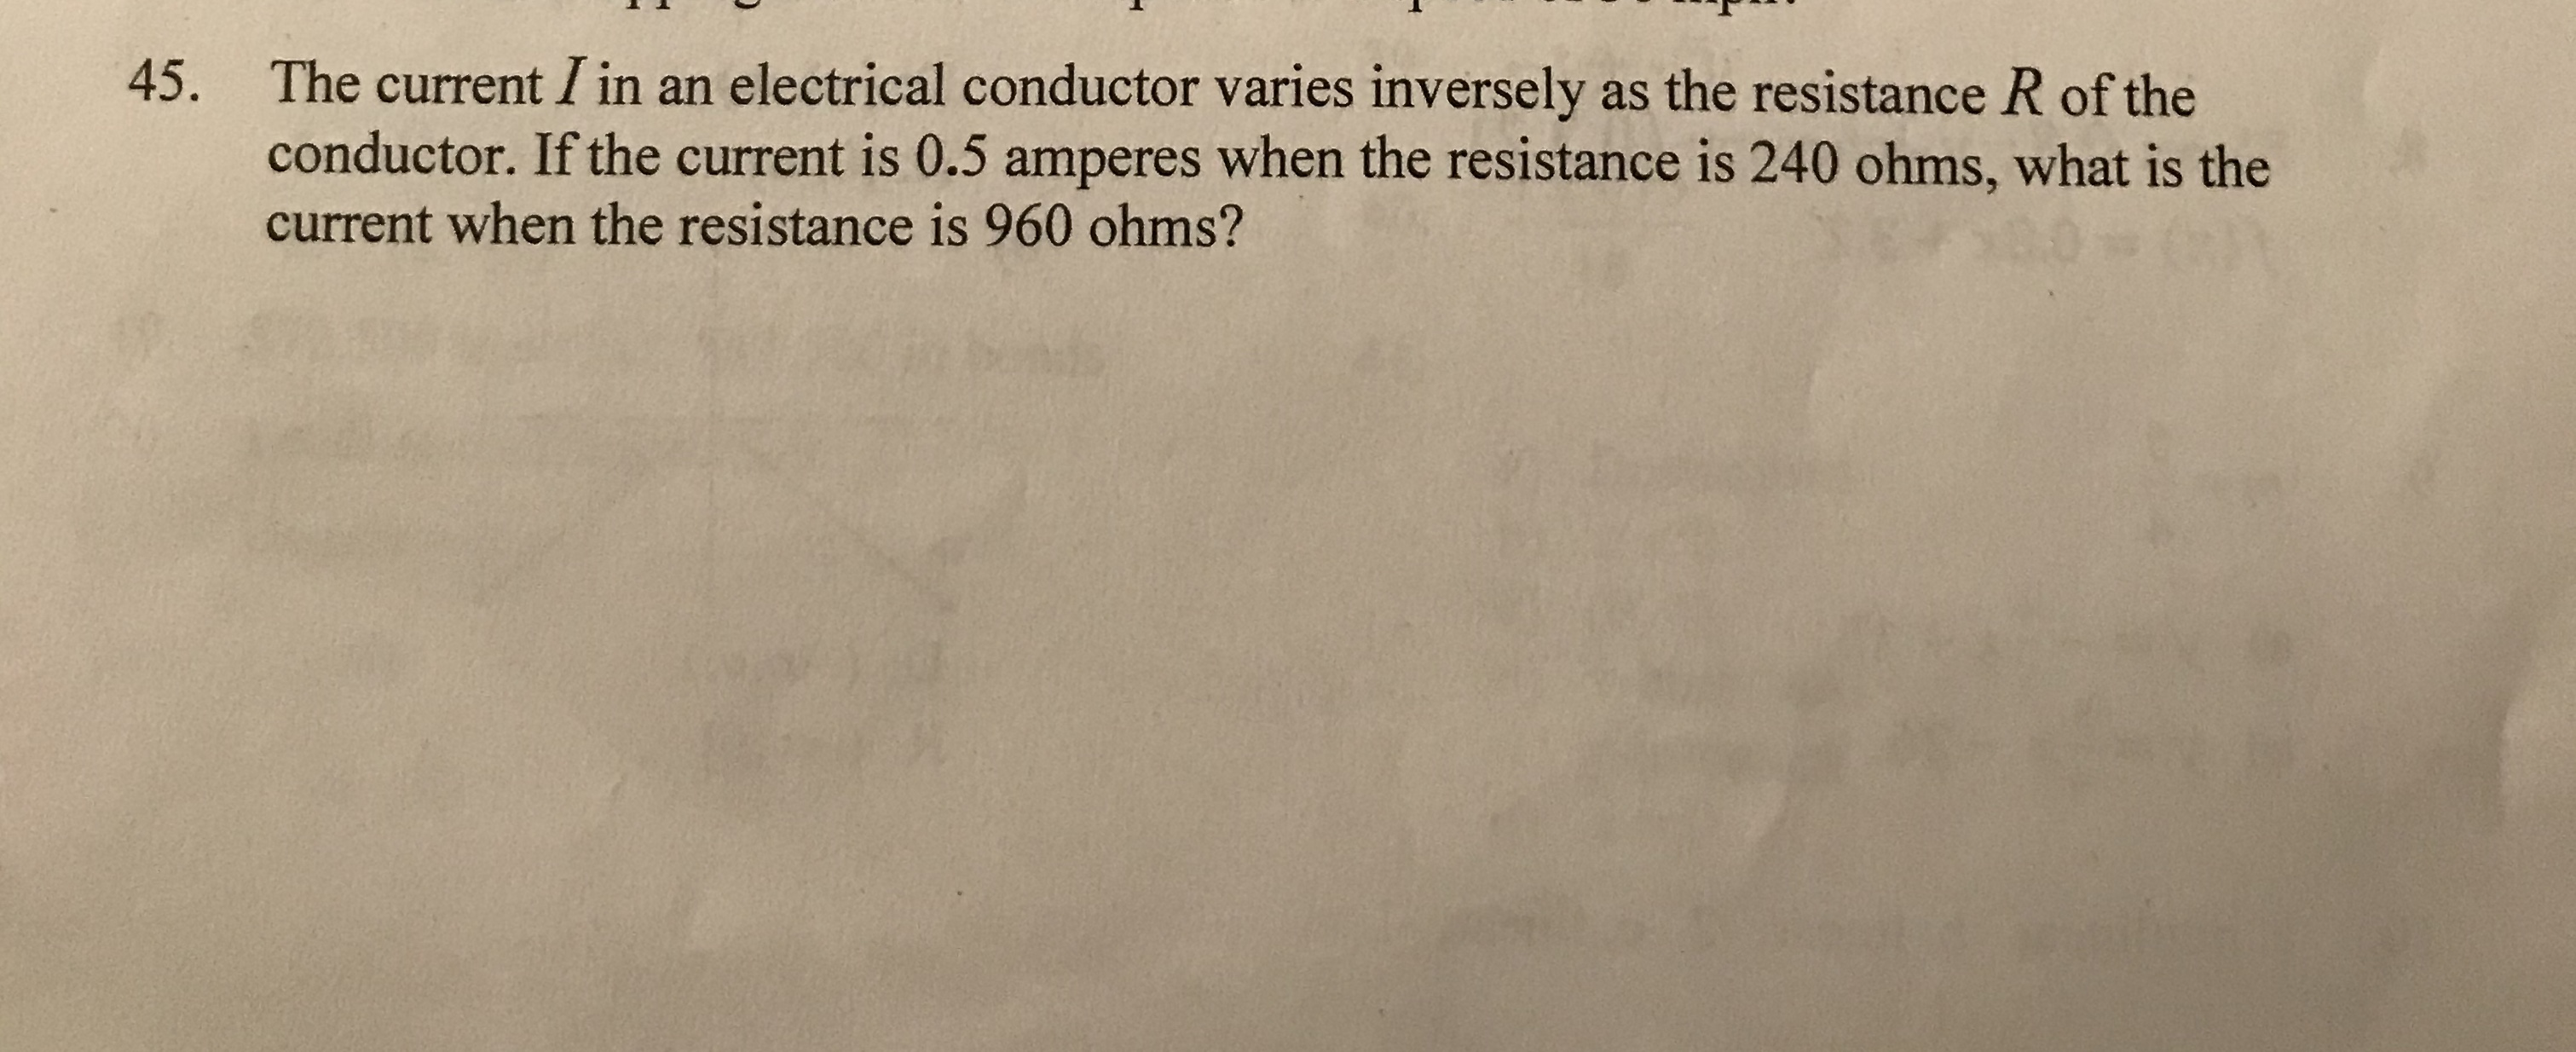 The current I in an electrical conductor varies inversely as the resistance R of the
conductor. If the current is 0.5 amperes when the resistance is 240 ohms, what is the
45.
current when the resistance is 960 ohms?
